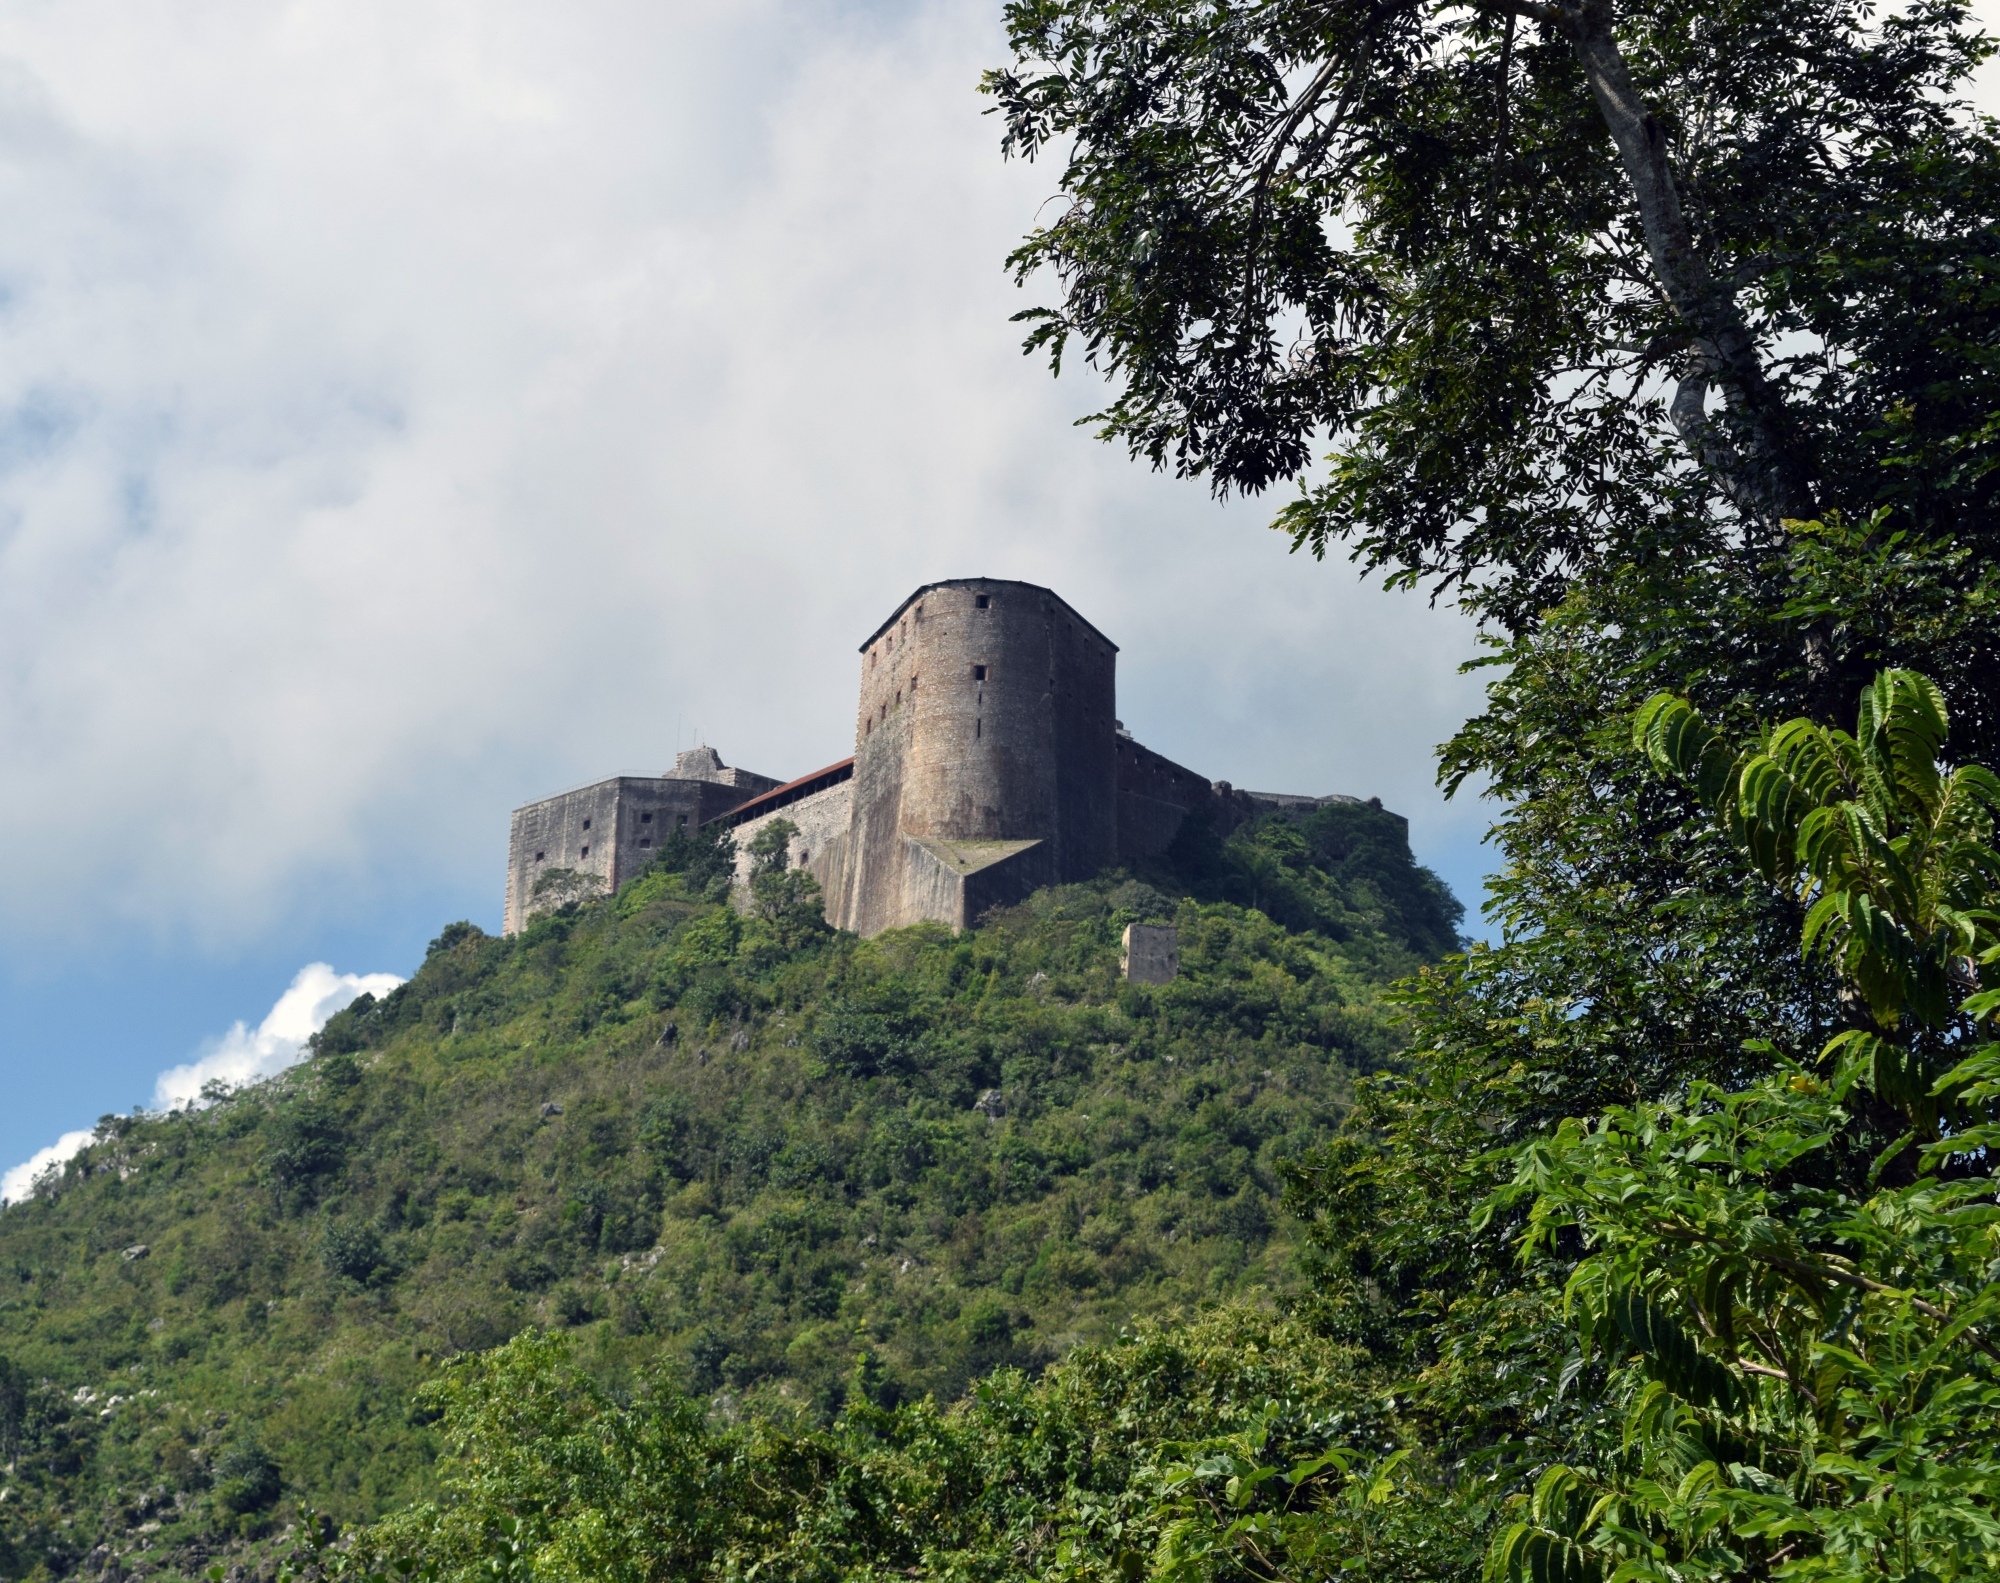 Visiting Citadelle Laferrière involves this hefty trek. Or take a pony.